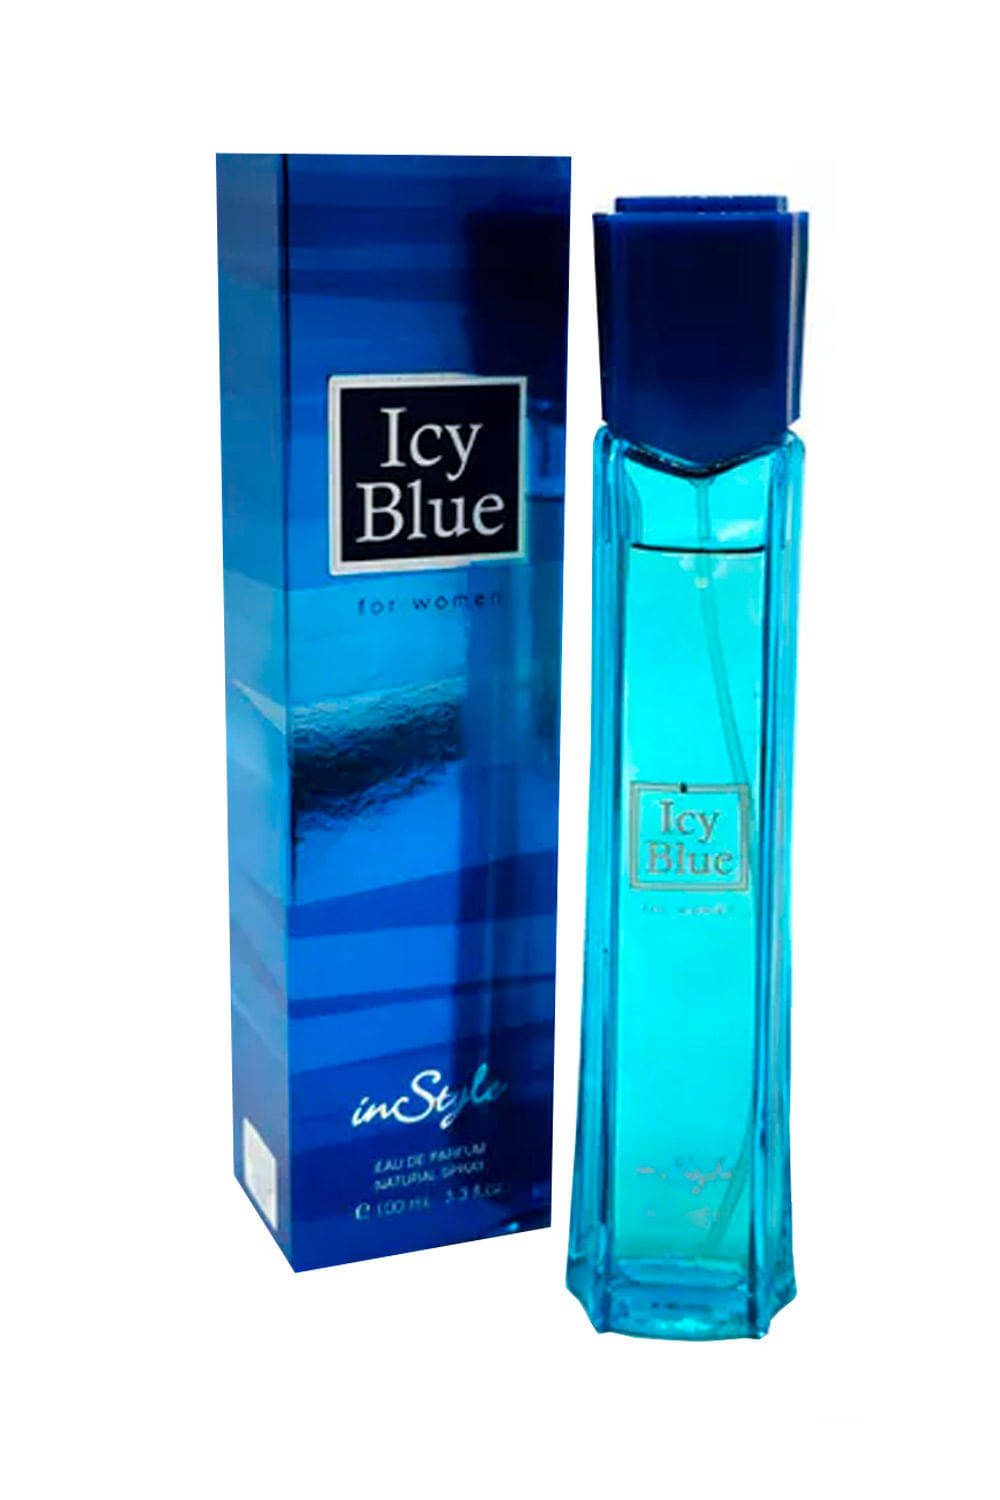 PERFUME MUJER ICY BLUE WOME